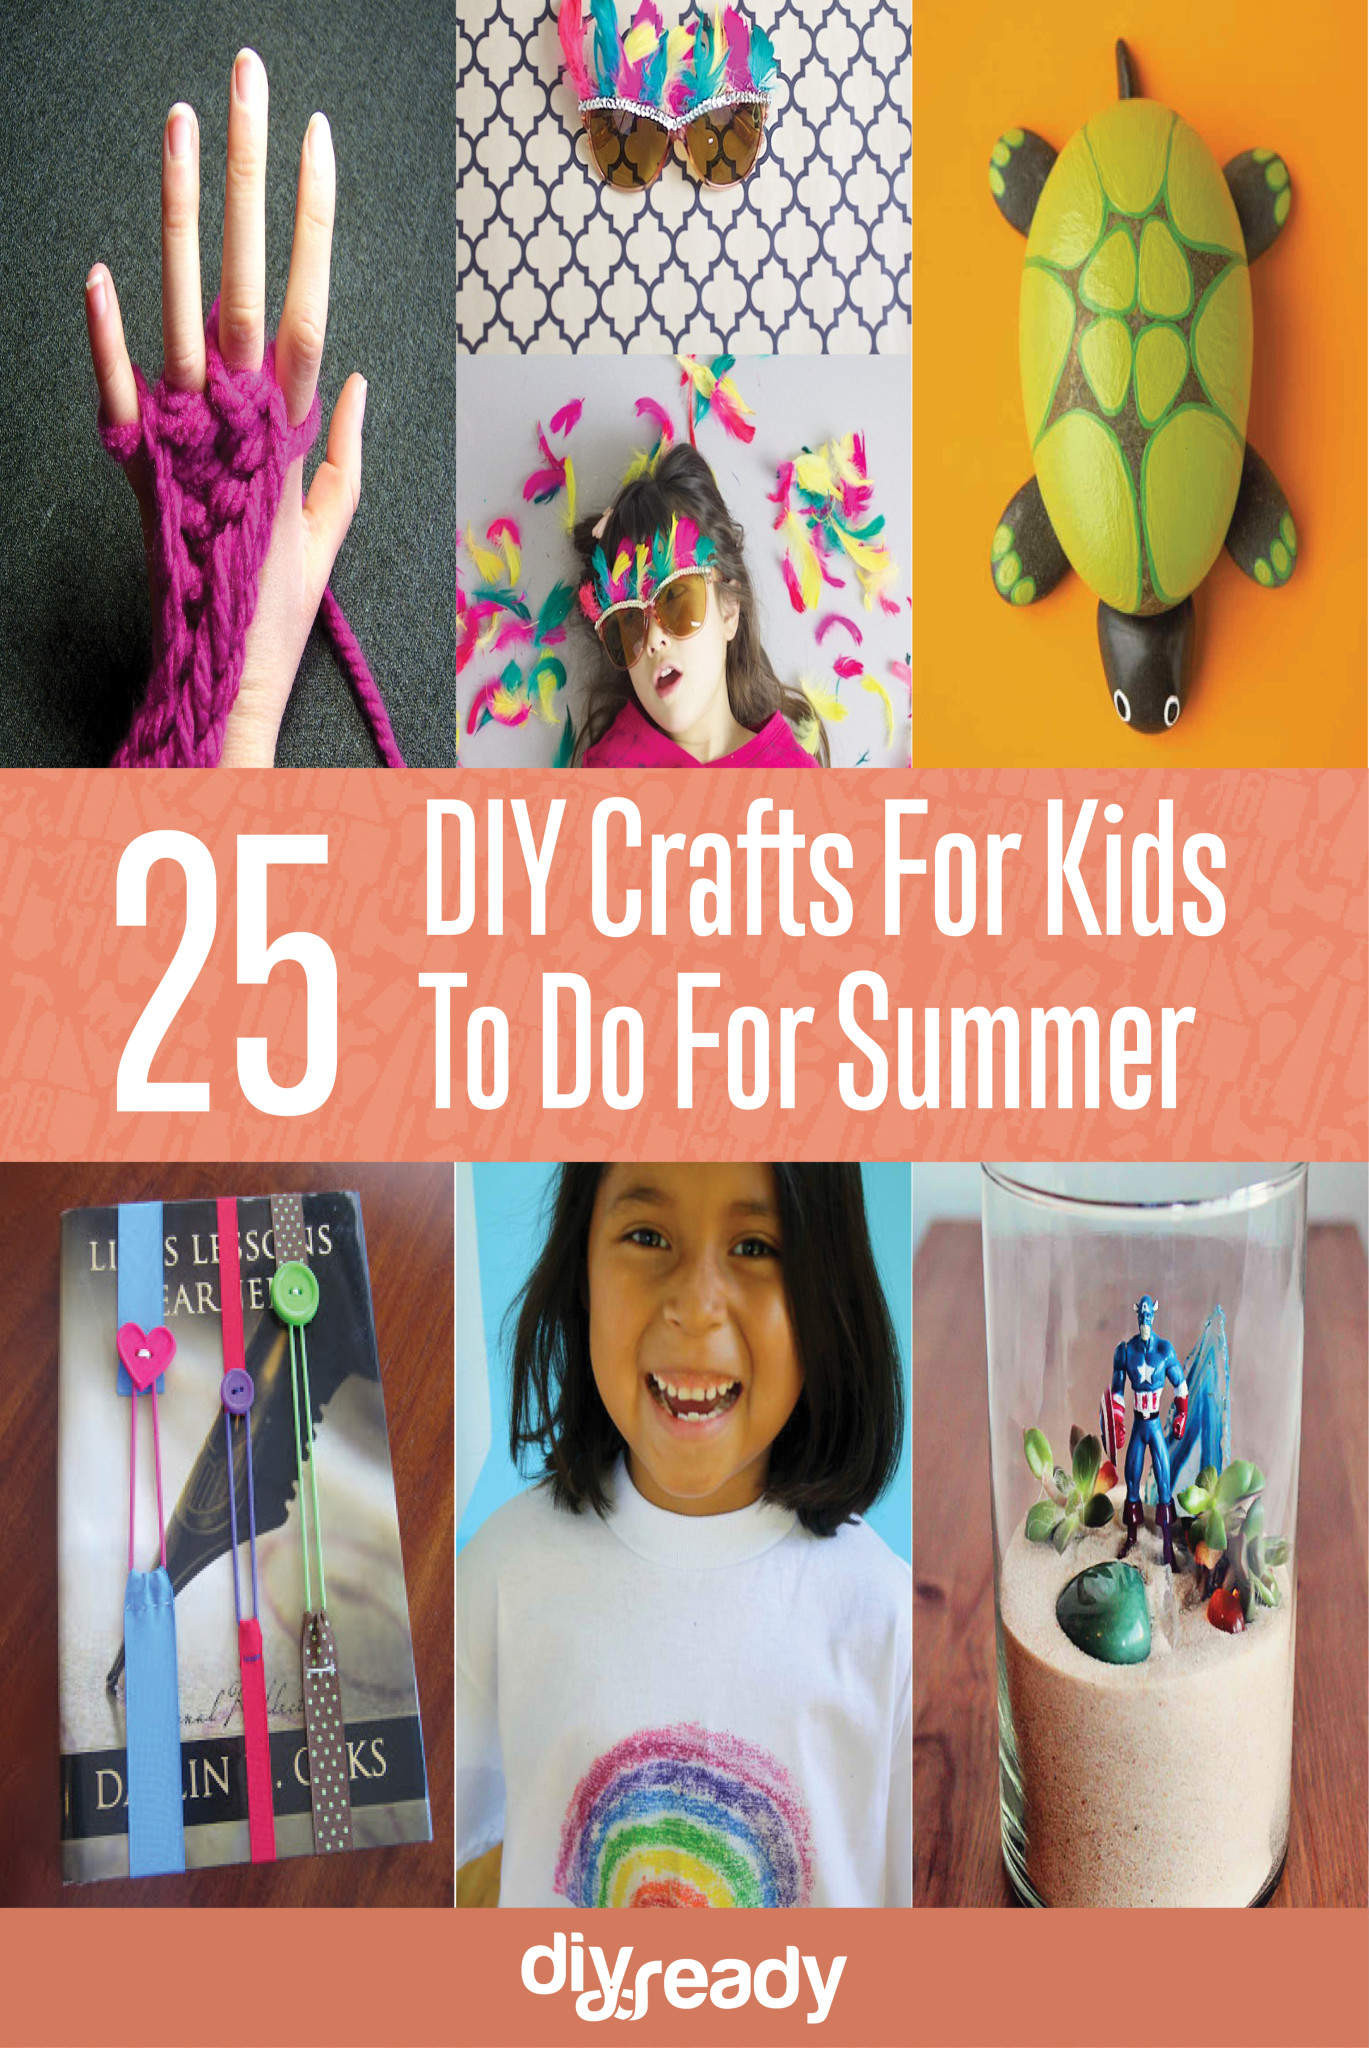 Crafts To Do In The Summer
 DIY Crafts for Kids To Do For Summer